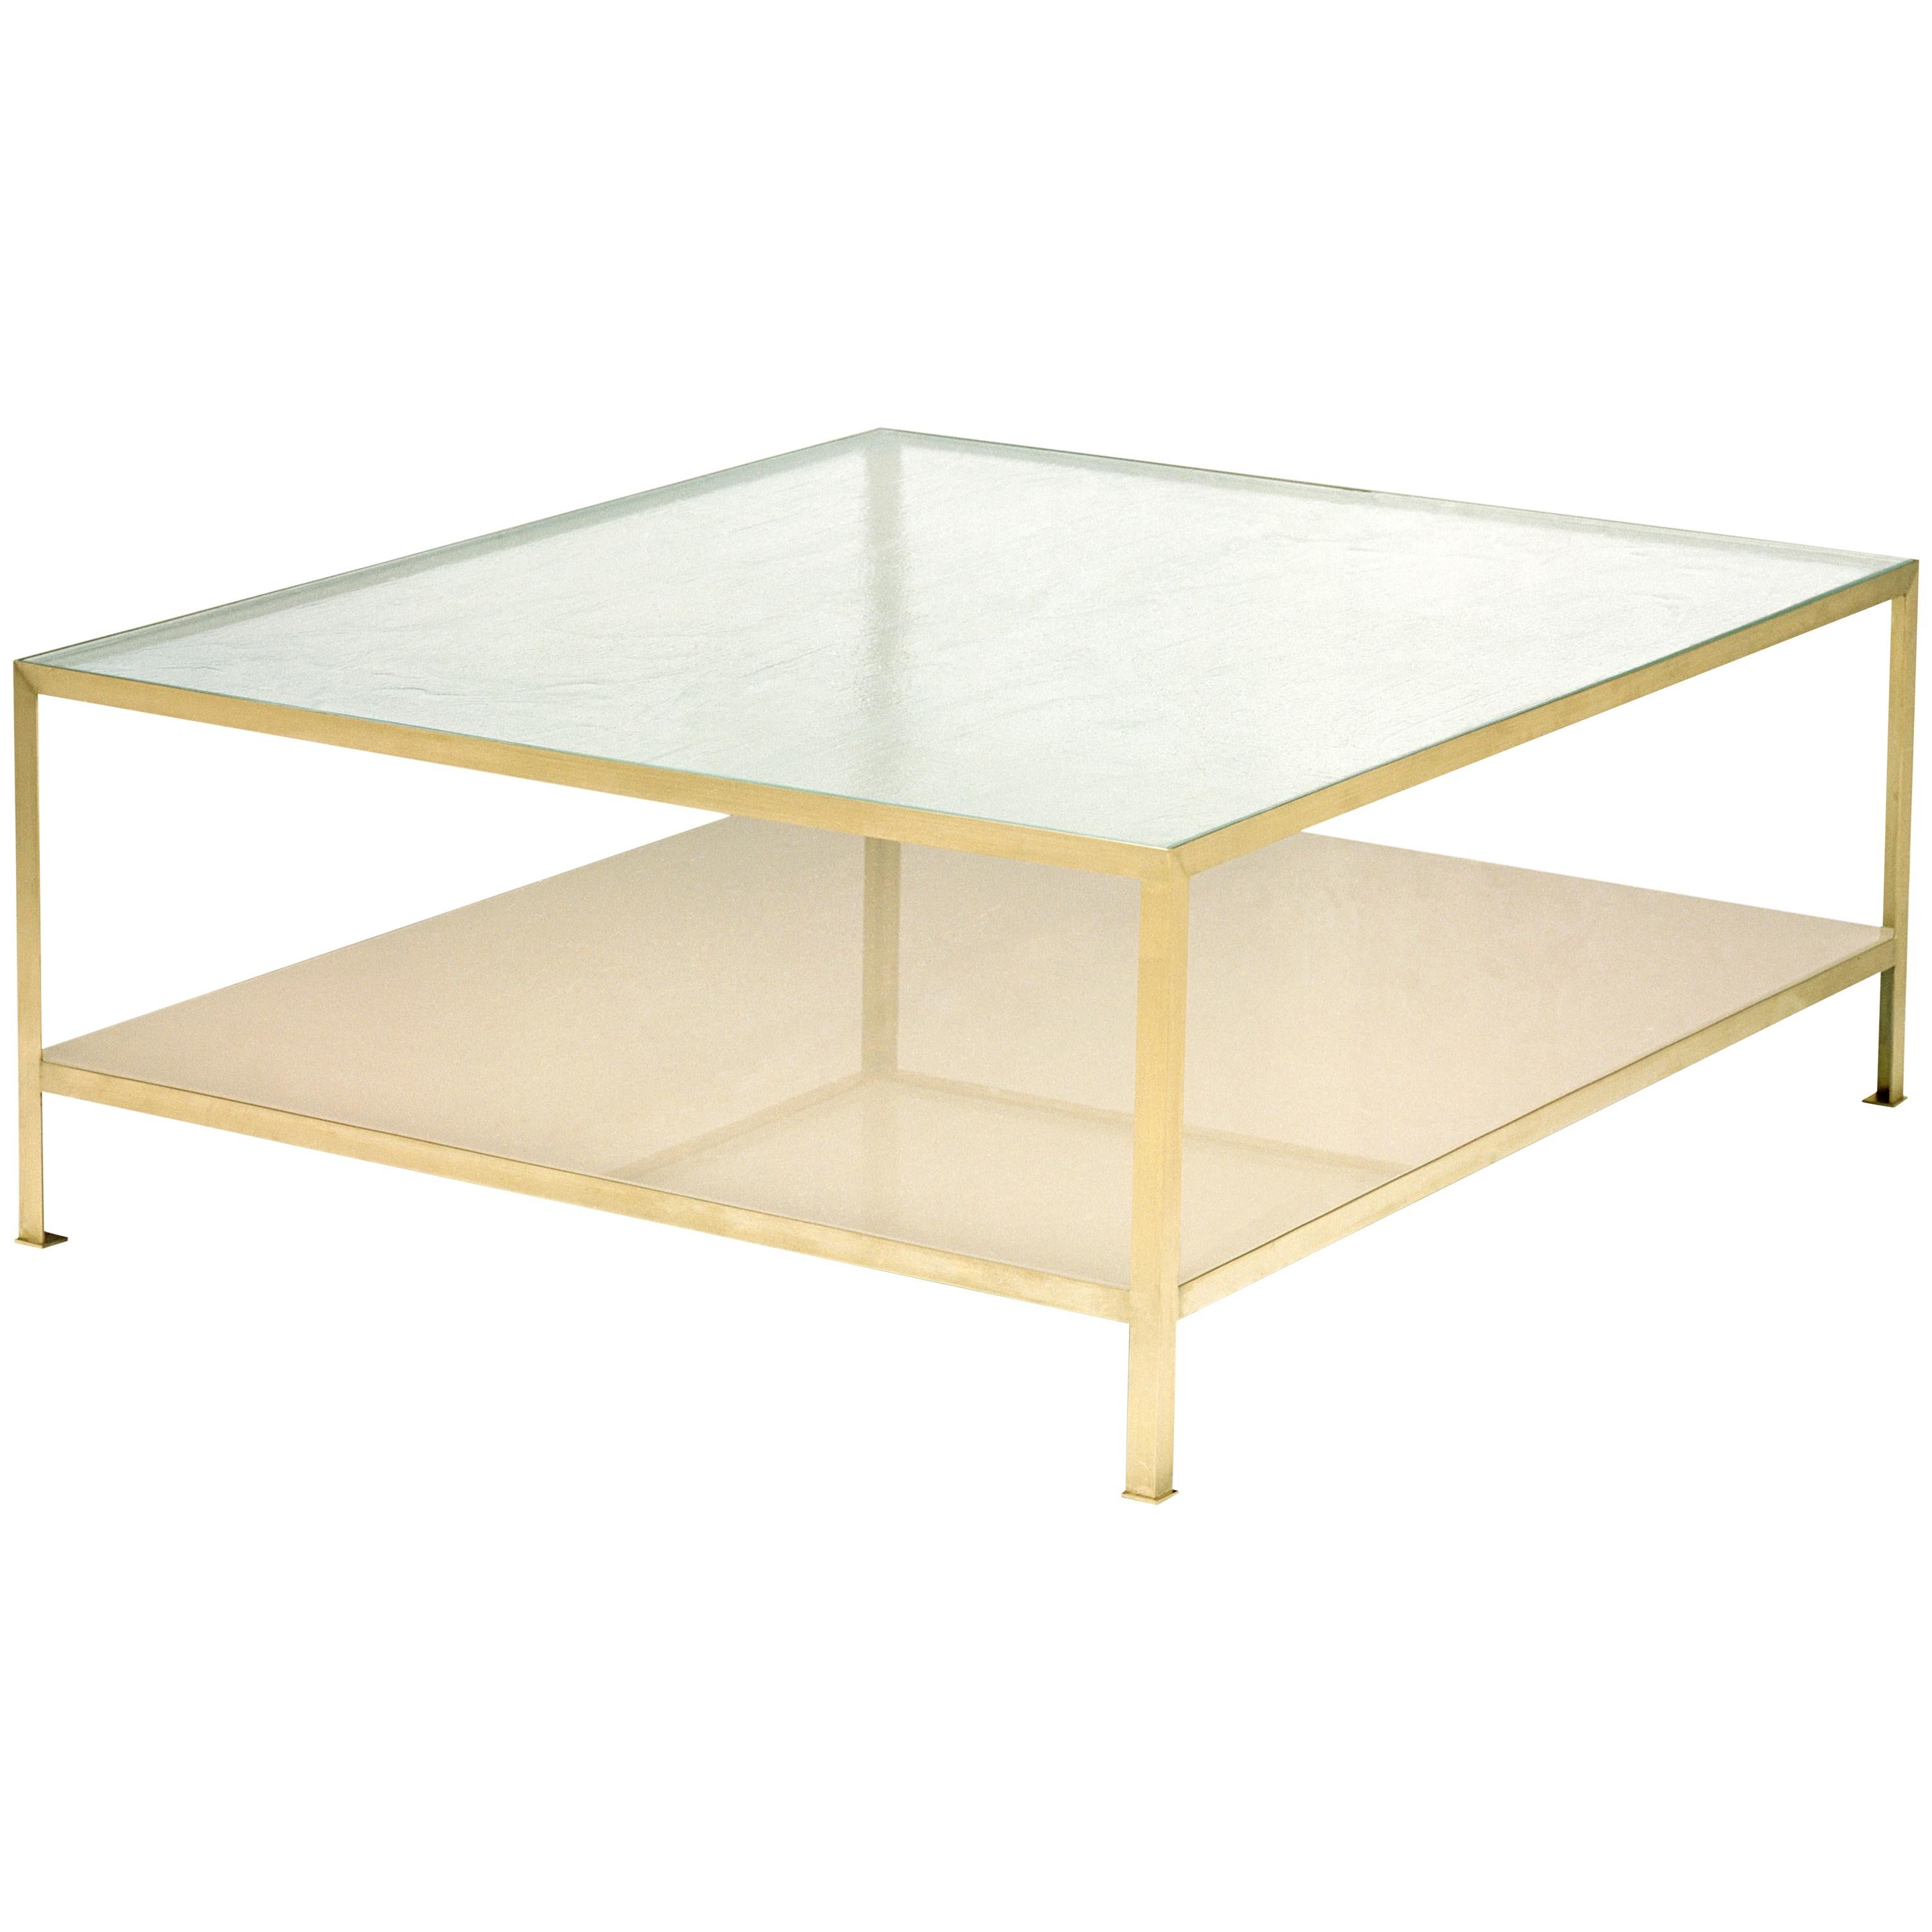 90° Glass & Metal Small Square Coffee Table, Vica designed by Annabelle Selldorf